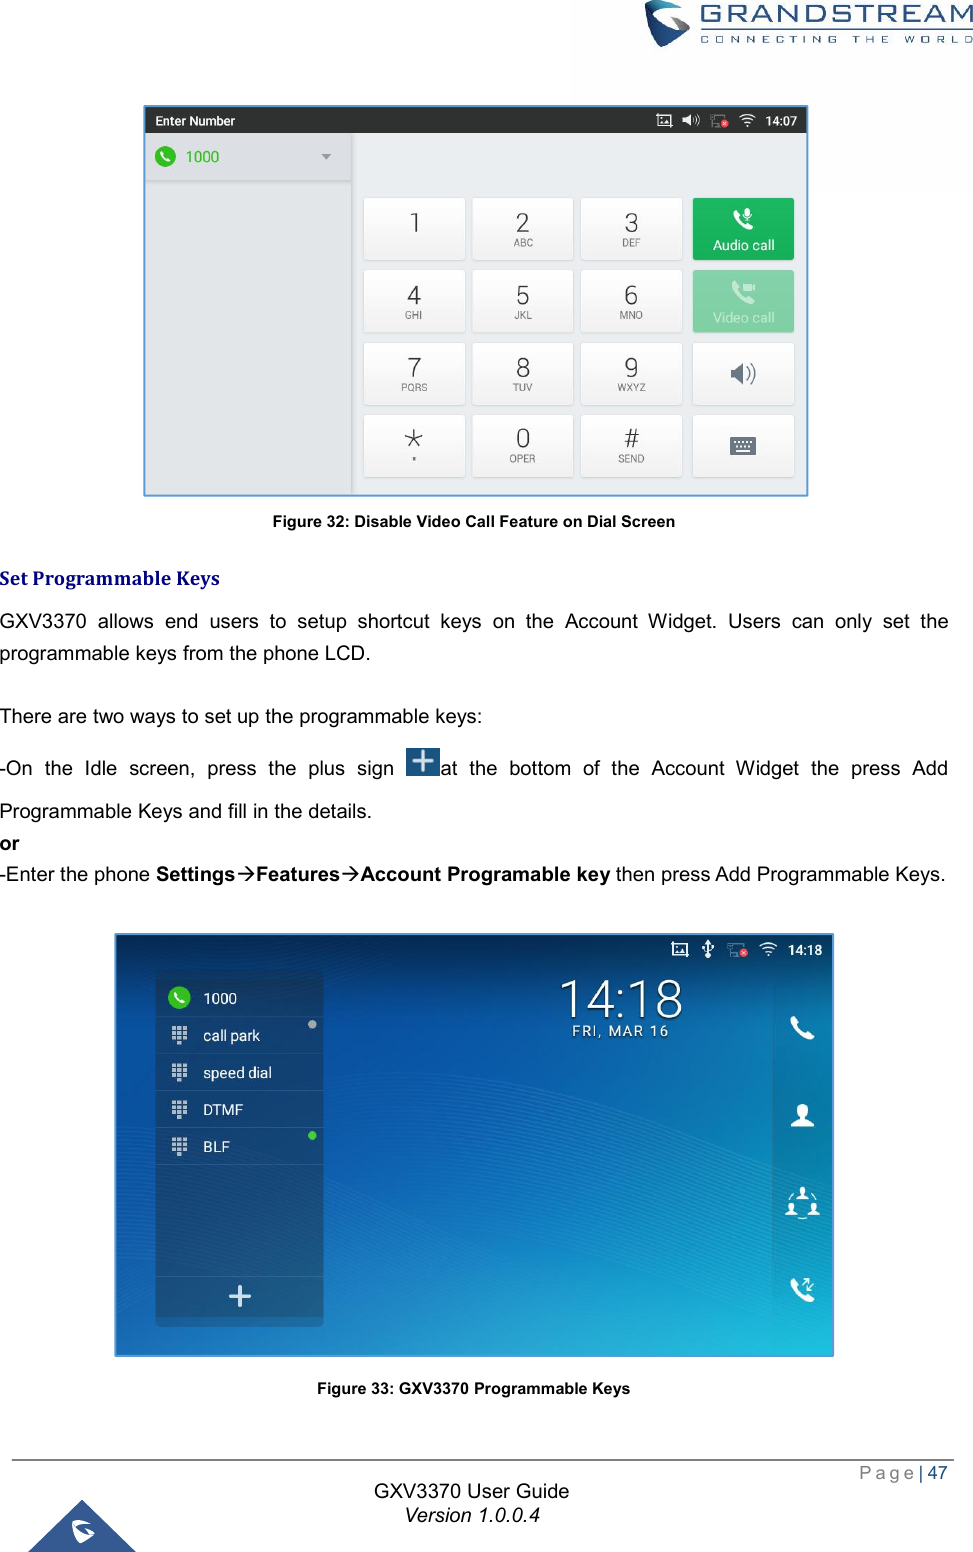  Page| 47  GXV3370 User Guide Version 1.0.0.4   Figure 32: Disable Video Call Feature on Dial Screen Set Programmable Keys GXV3370 allows end users to setup shortcut keys on the Account Widget. Users can only set the programmable keys from the phone LCD.  There are two ways to set up the programmable keys: -On the Idle screen, press the plus sign  at the bottom of the Account Widget the press Add Programmable Keys and fill in the details. or -Enter the phone SettingsàFeaturesàAccount Programable key then press Add Programmable Keys.   Figure 33: GXV3370 Programmable Keys 